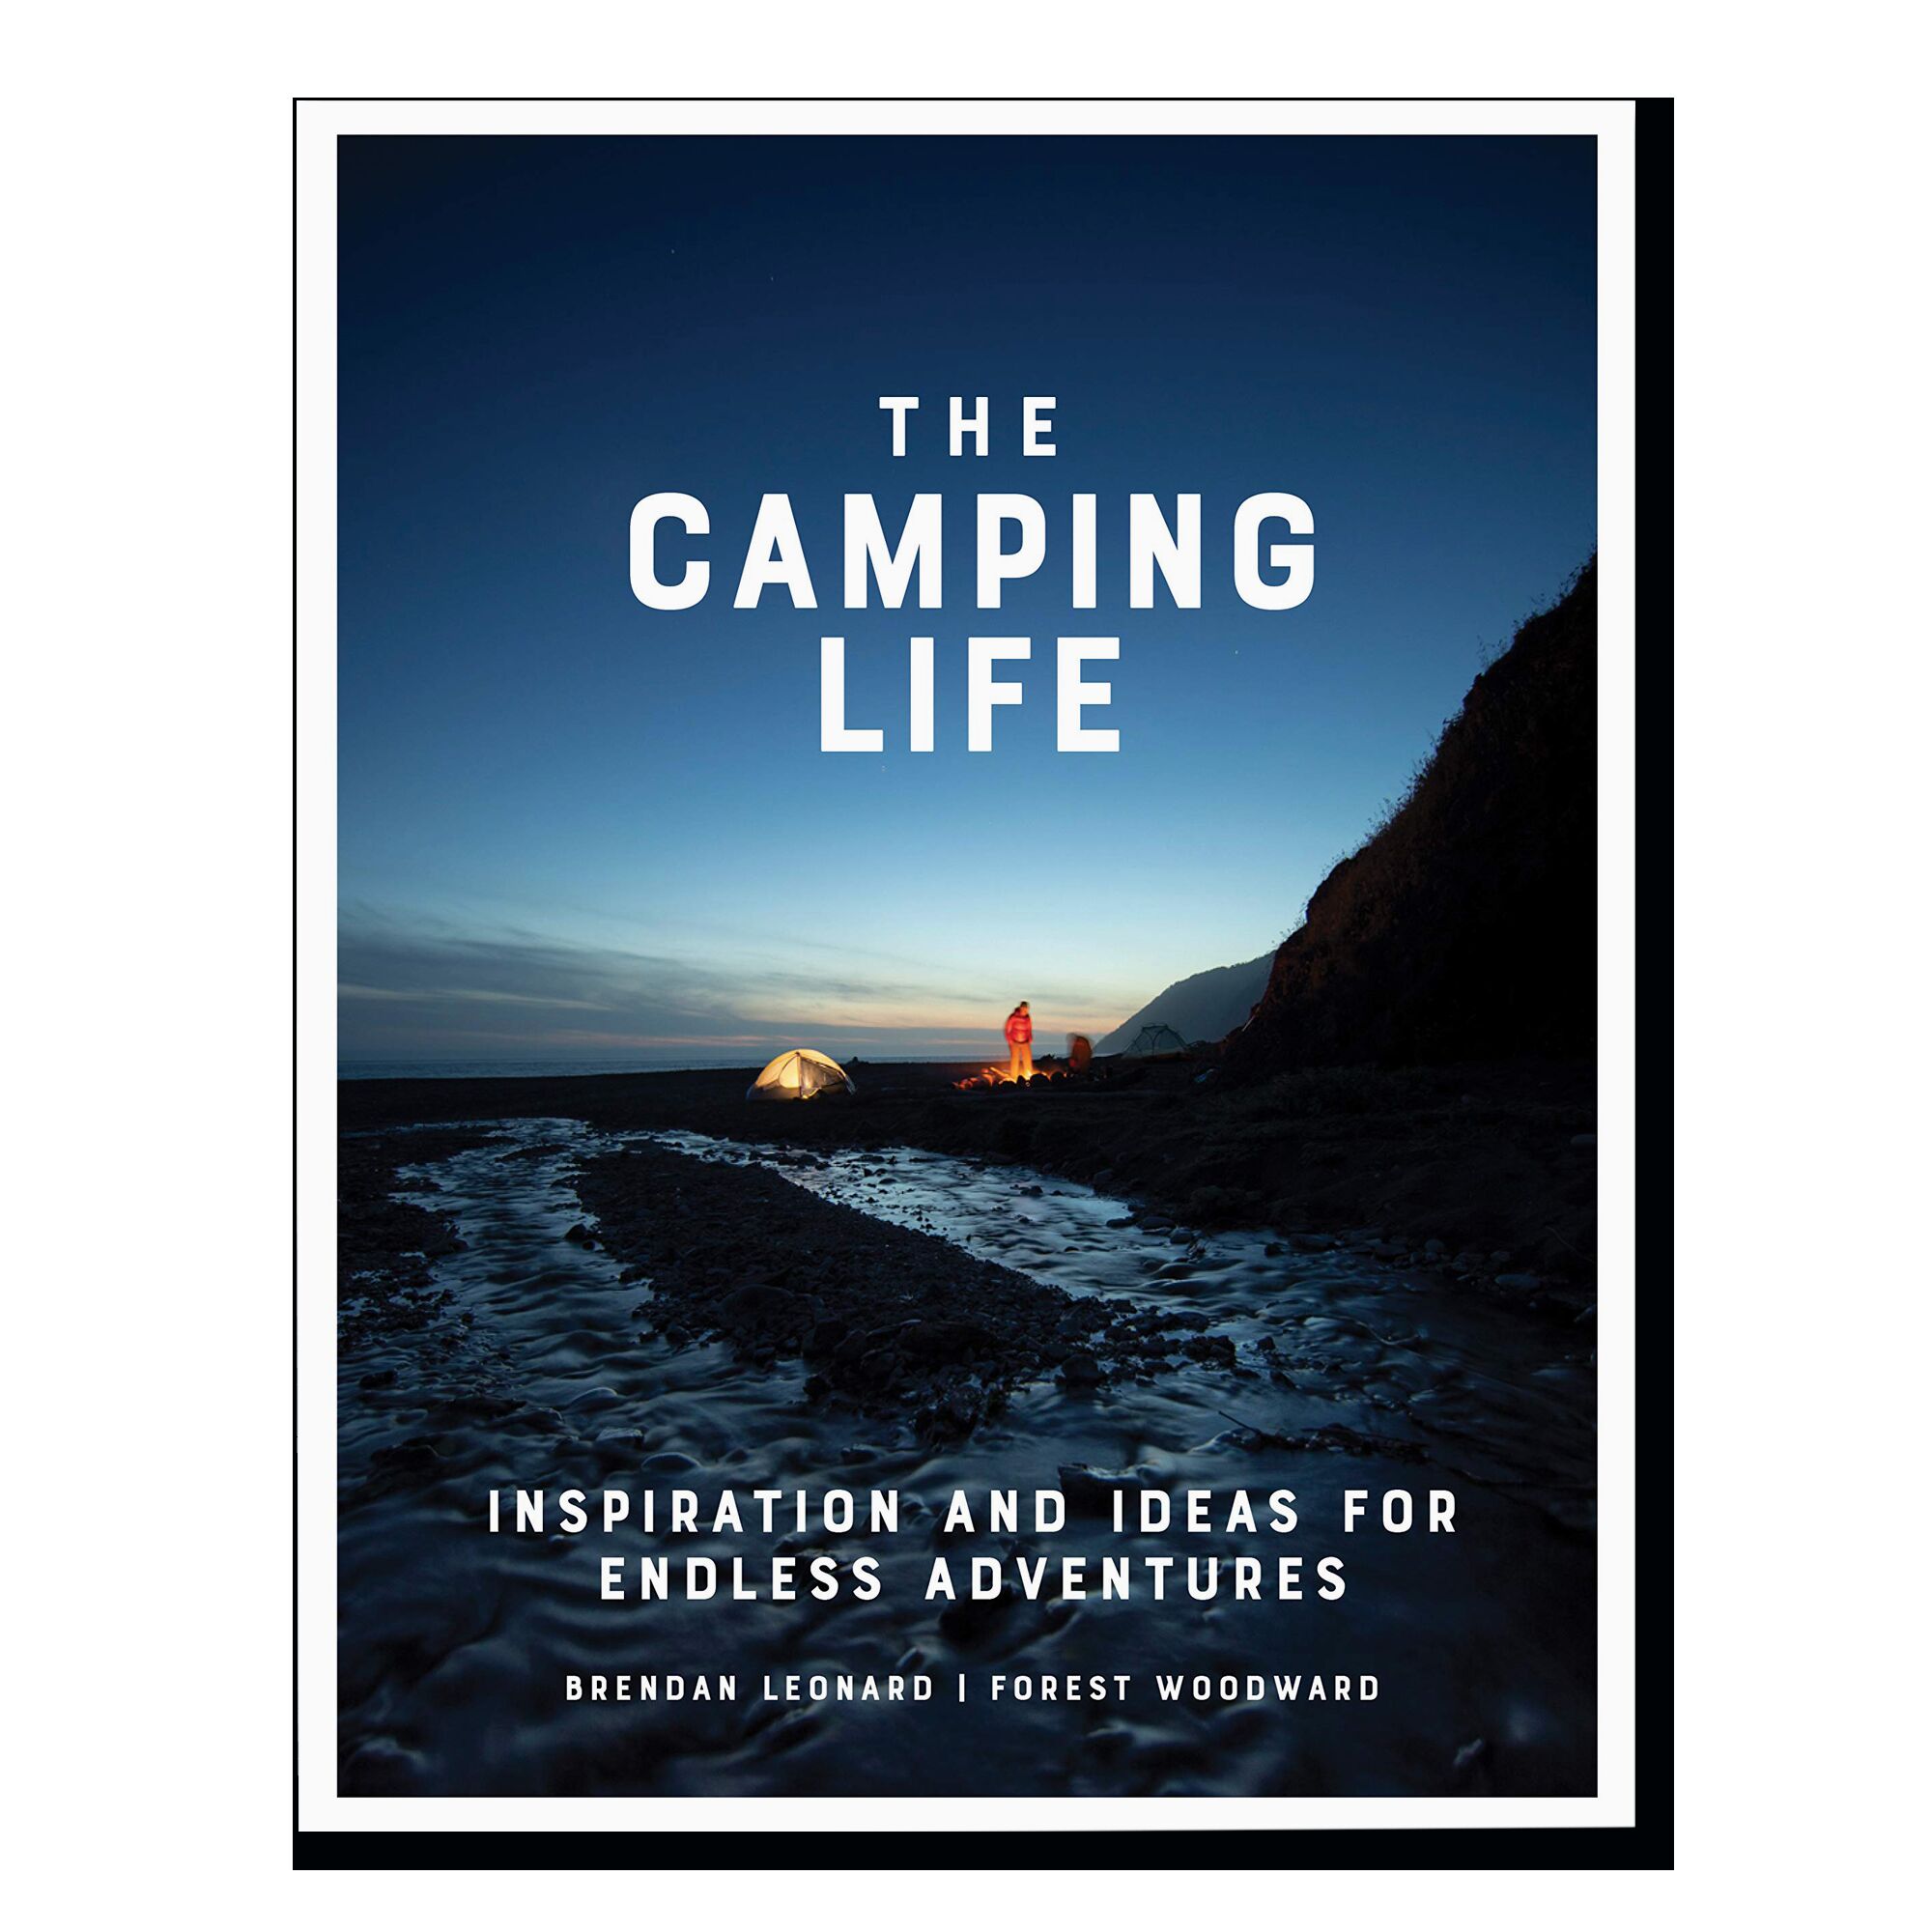 The Camping Life: Inspiration and Ideas for Endless Adventures